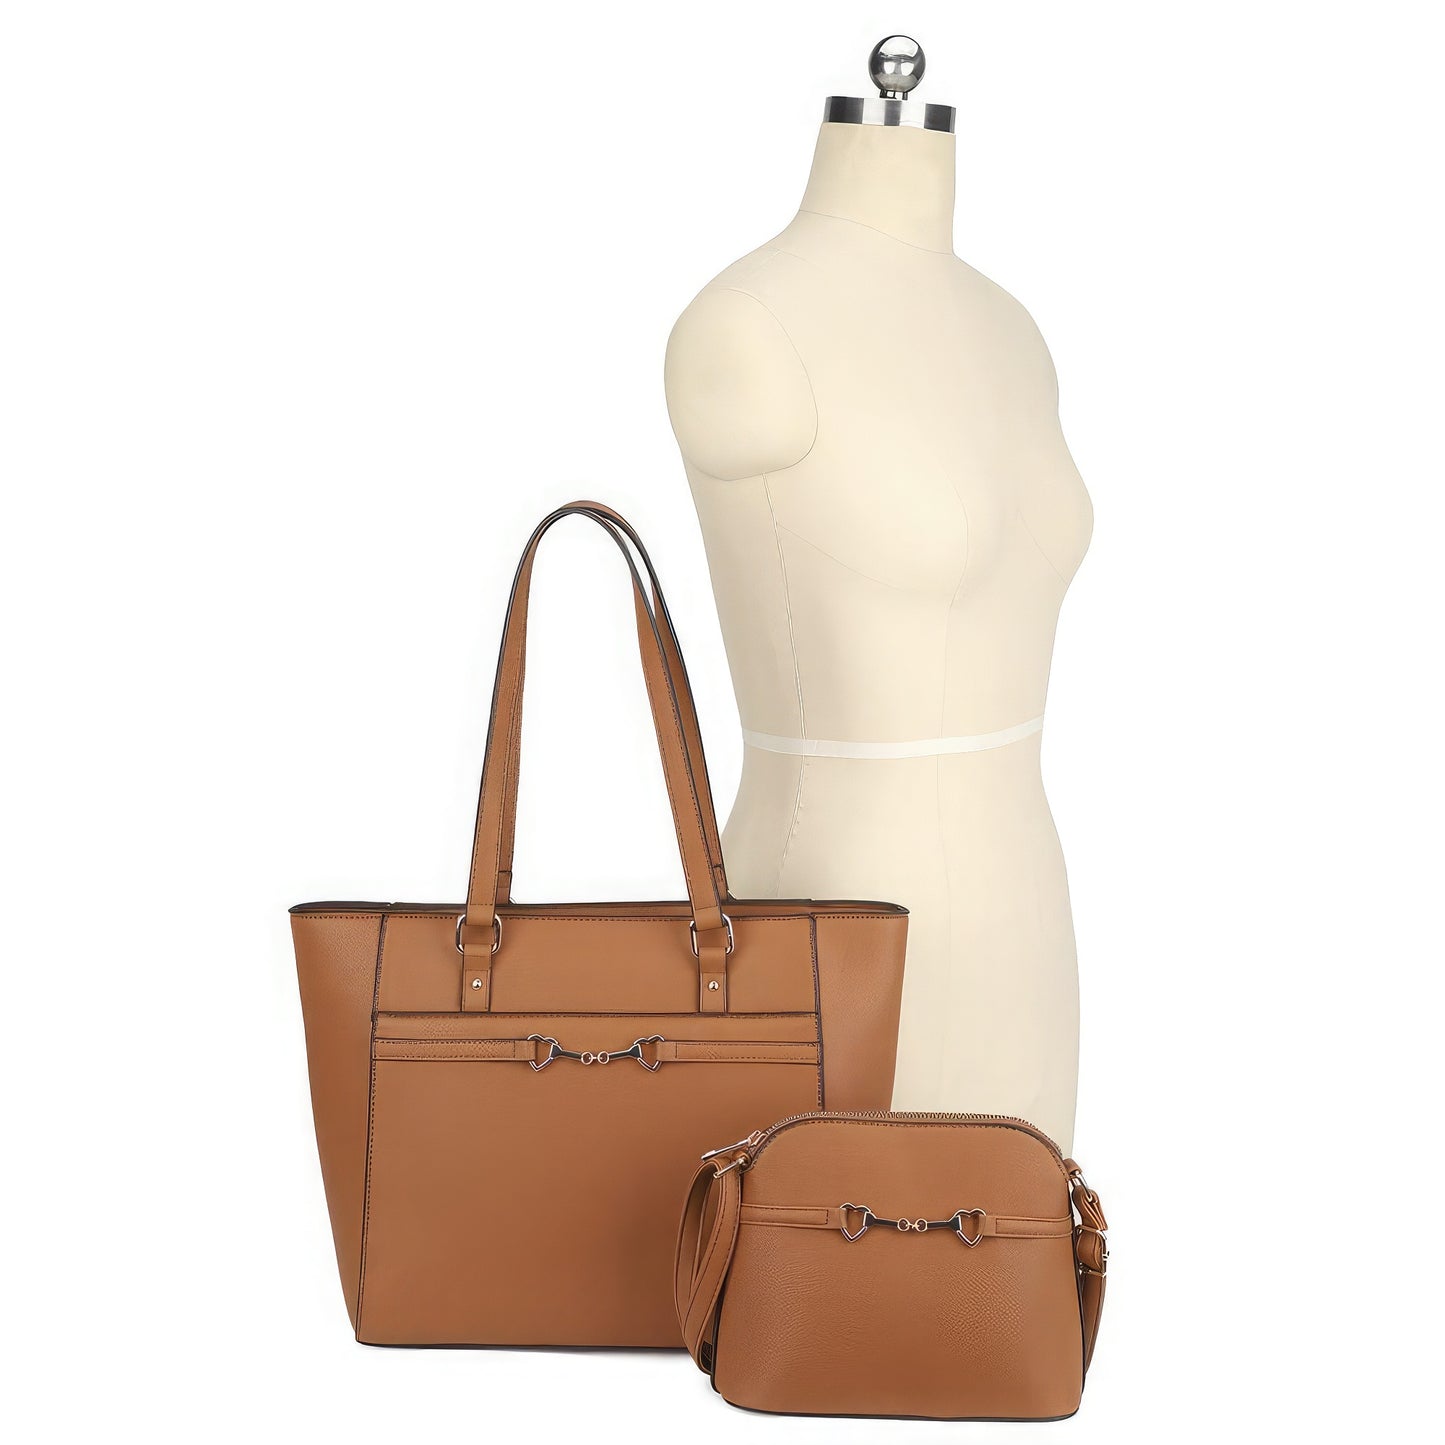 Matching Crossbody and Tote Bag Set (5 Colors)